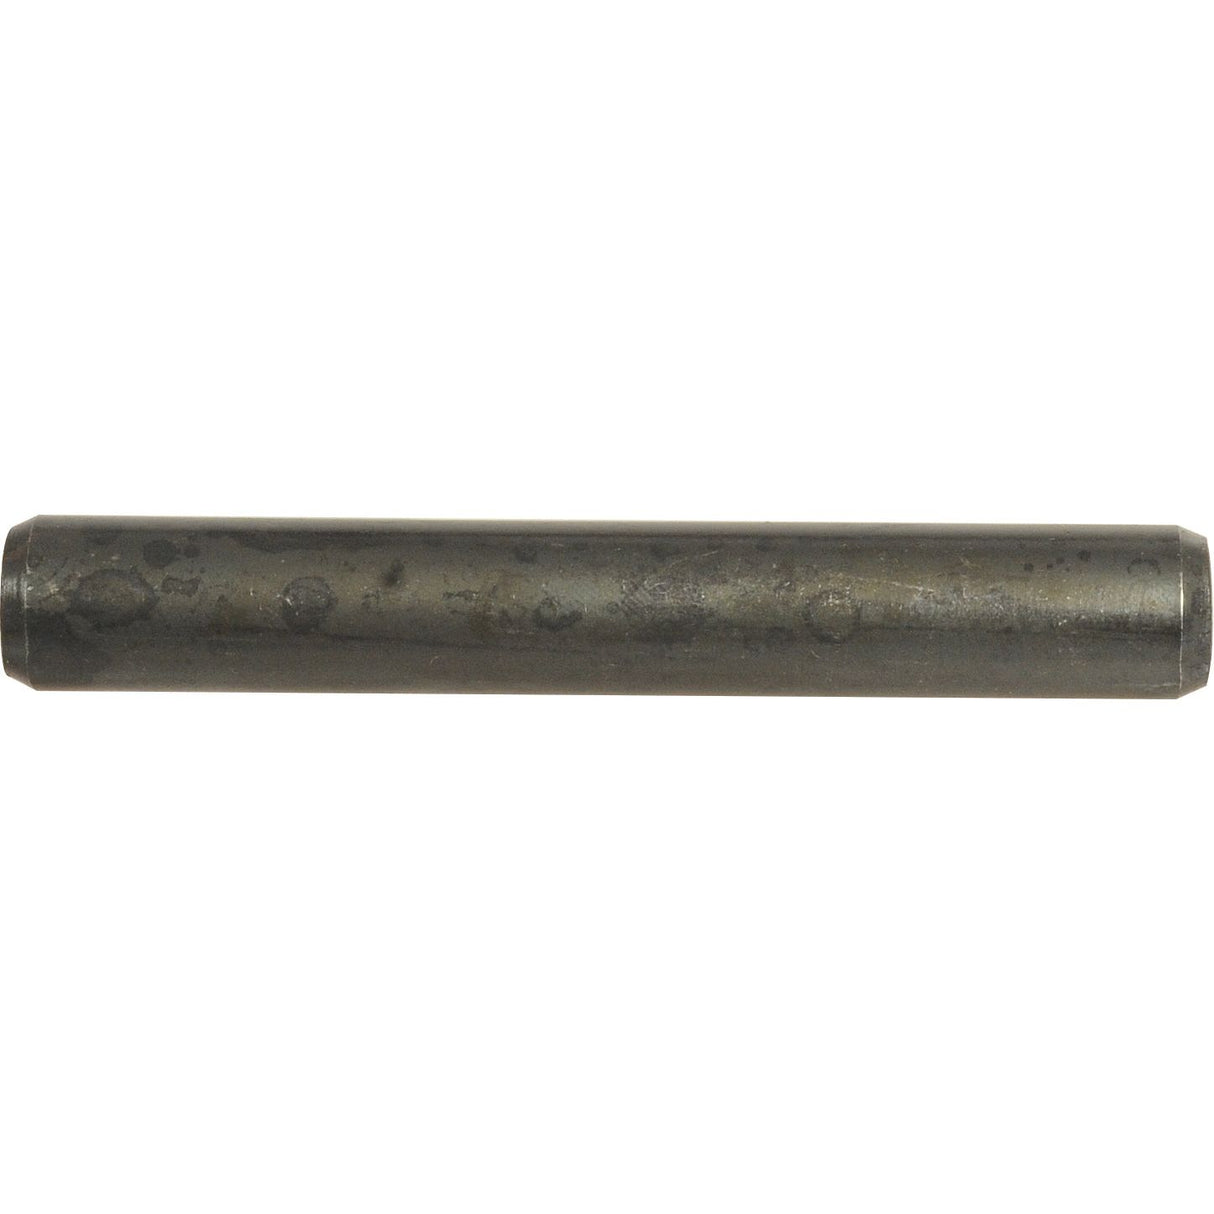 Imperial Roll Pin, Pin⌀5/16'' x 2 1/4''
 - S.1141 - Farming Parts